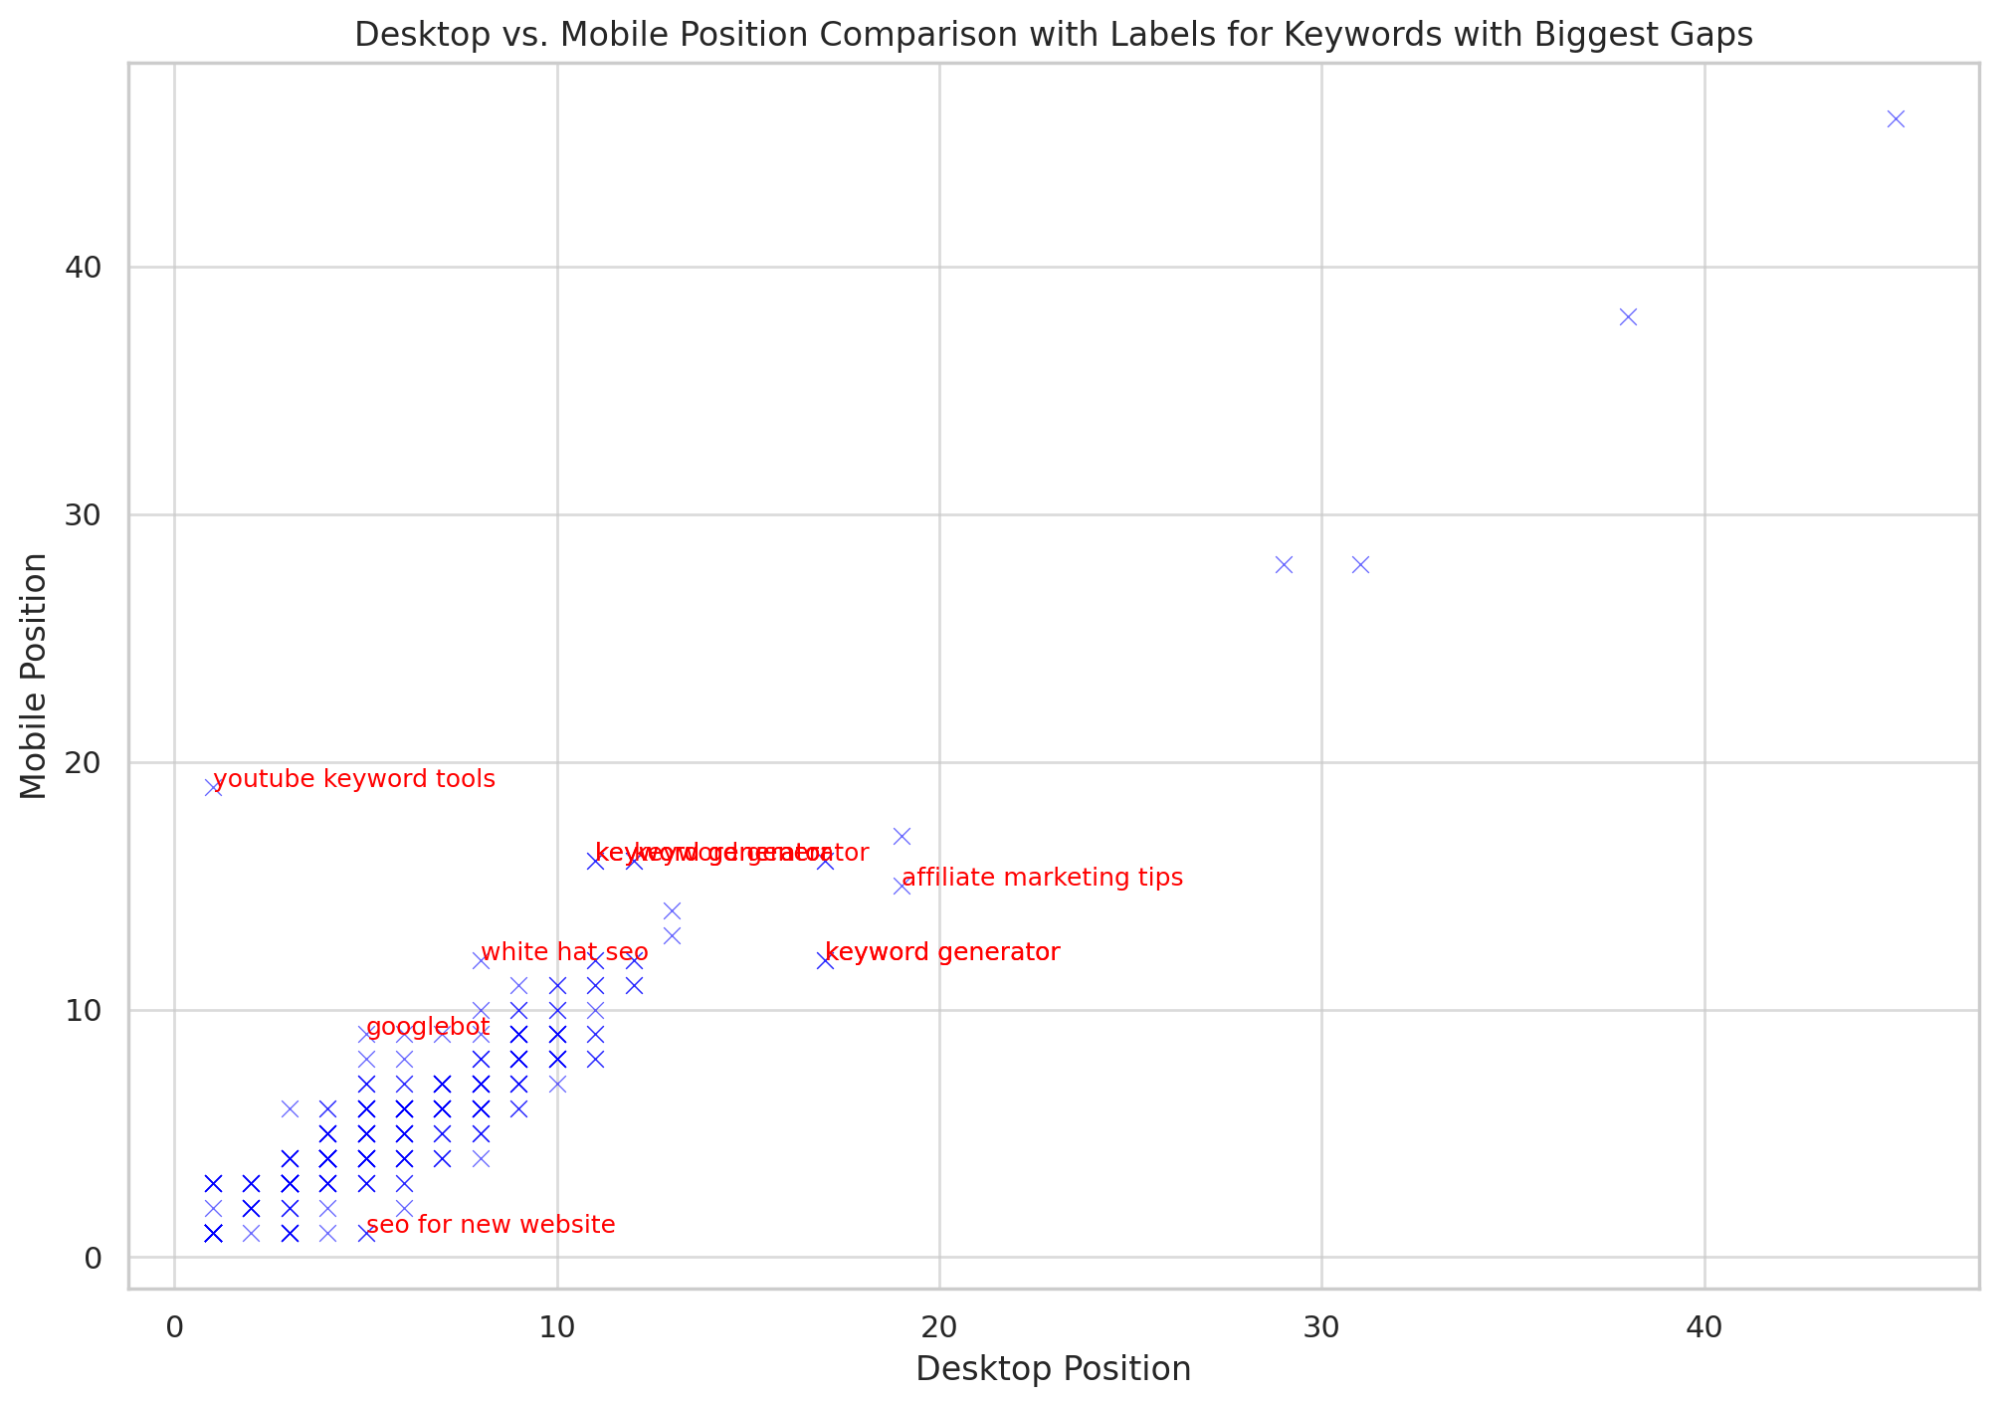 scatterplot-showing-mobile-and-desktop-rankings-wi